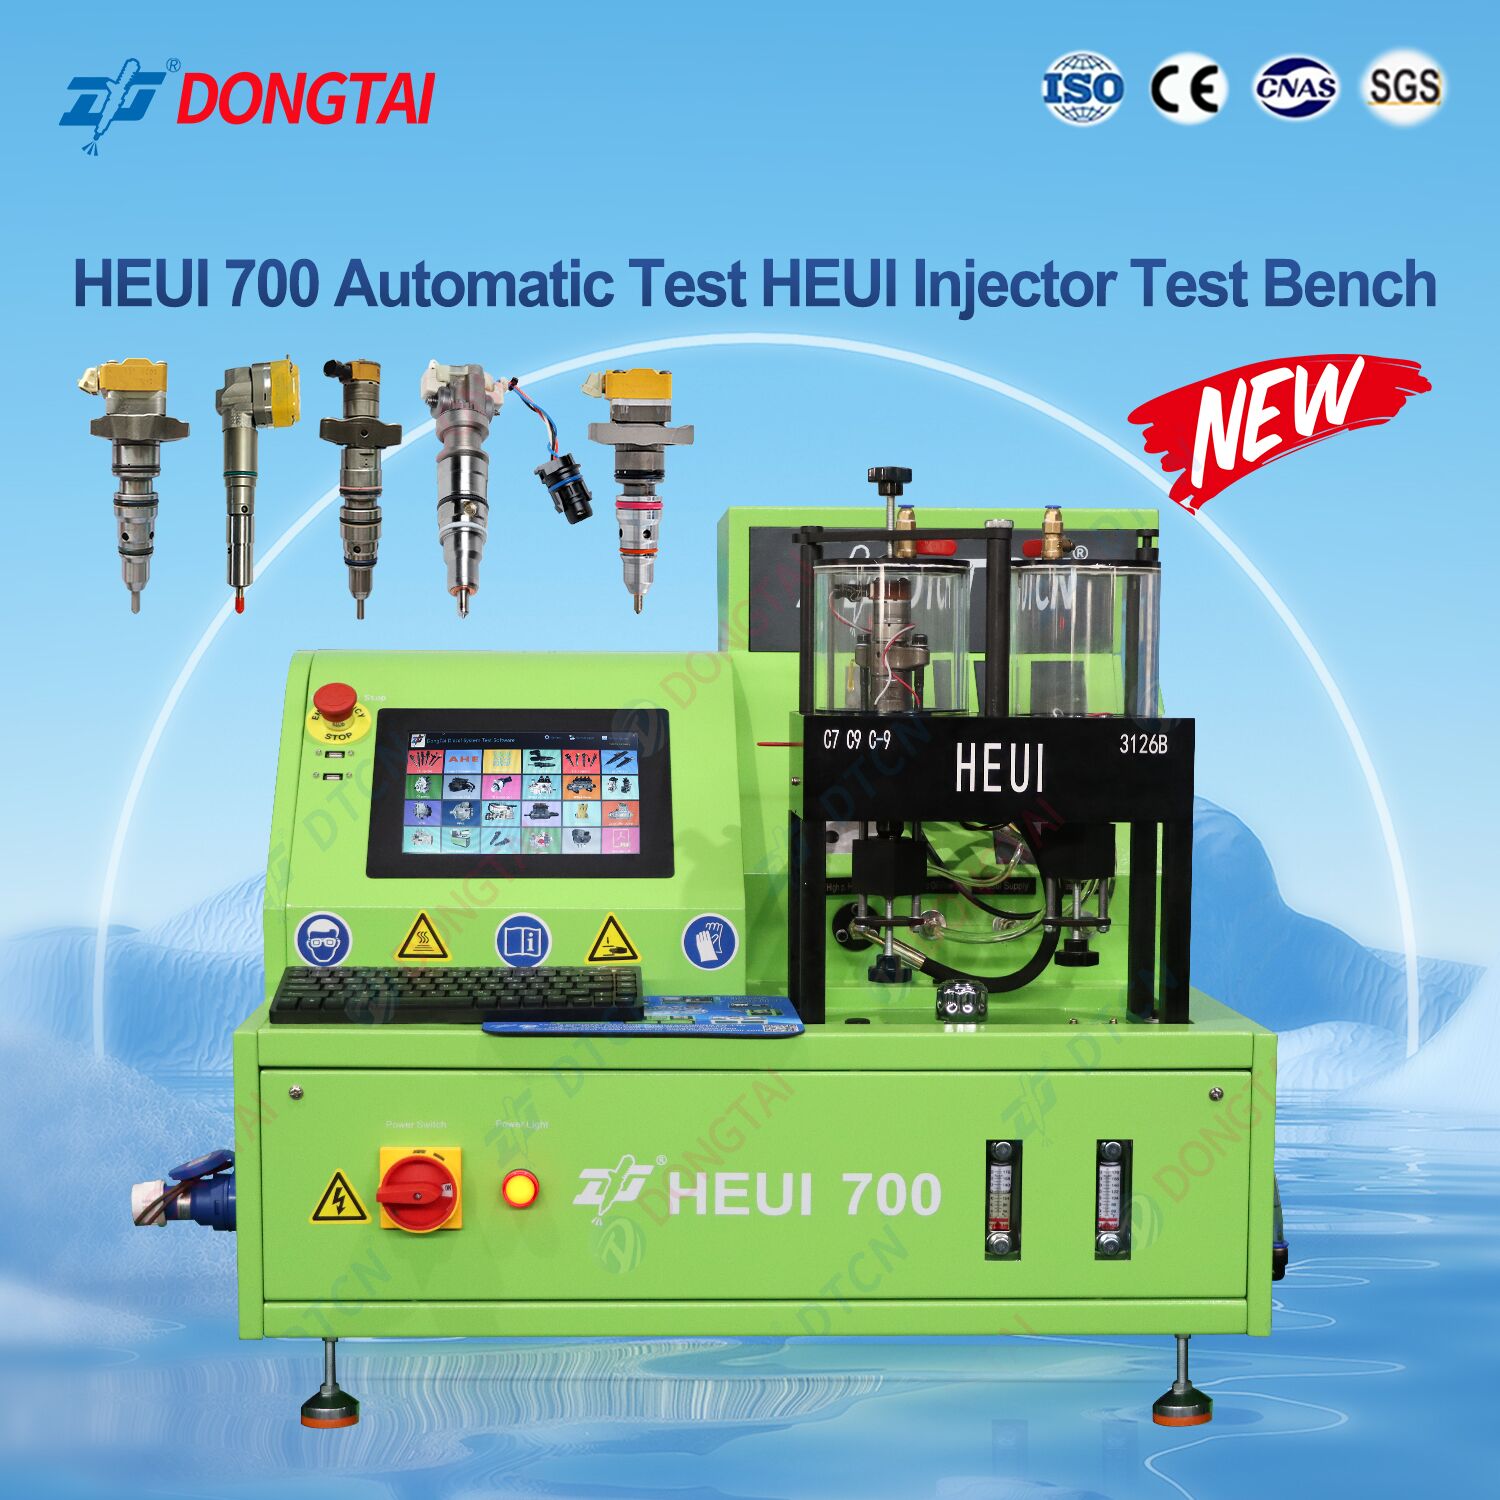 HEUI 700 automatic test HEUI injector test bench